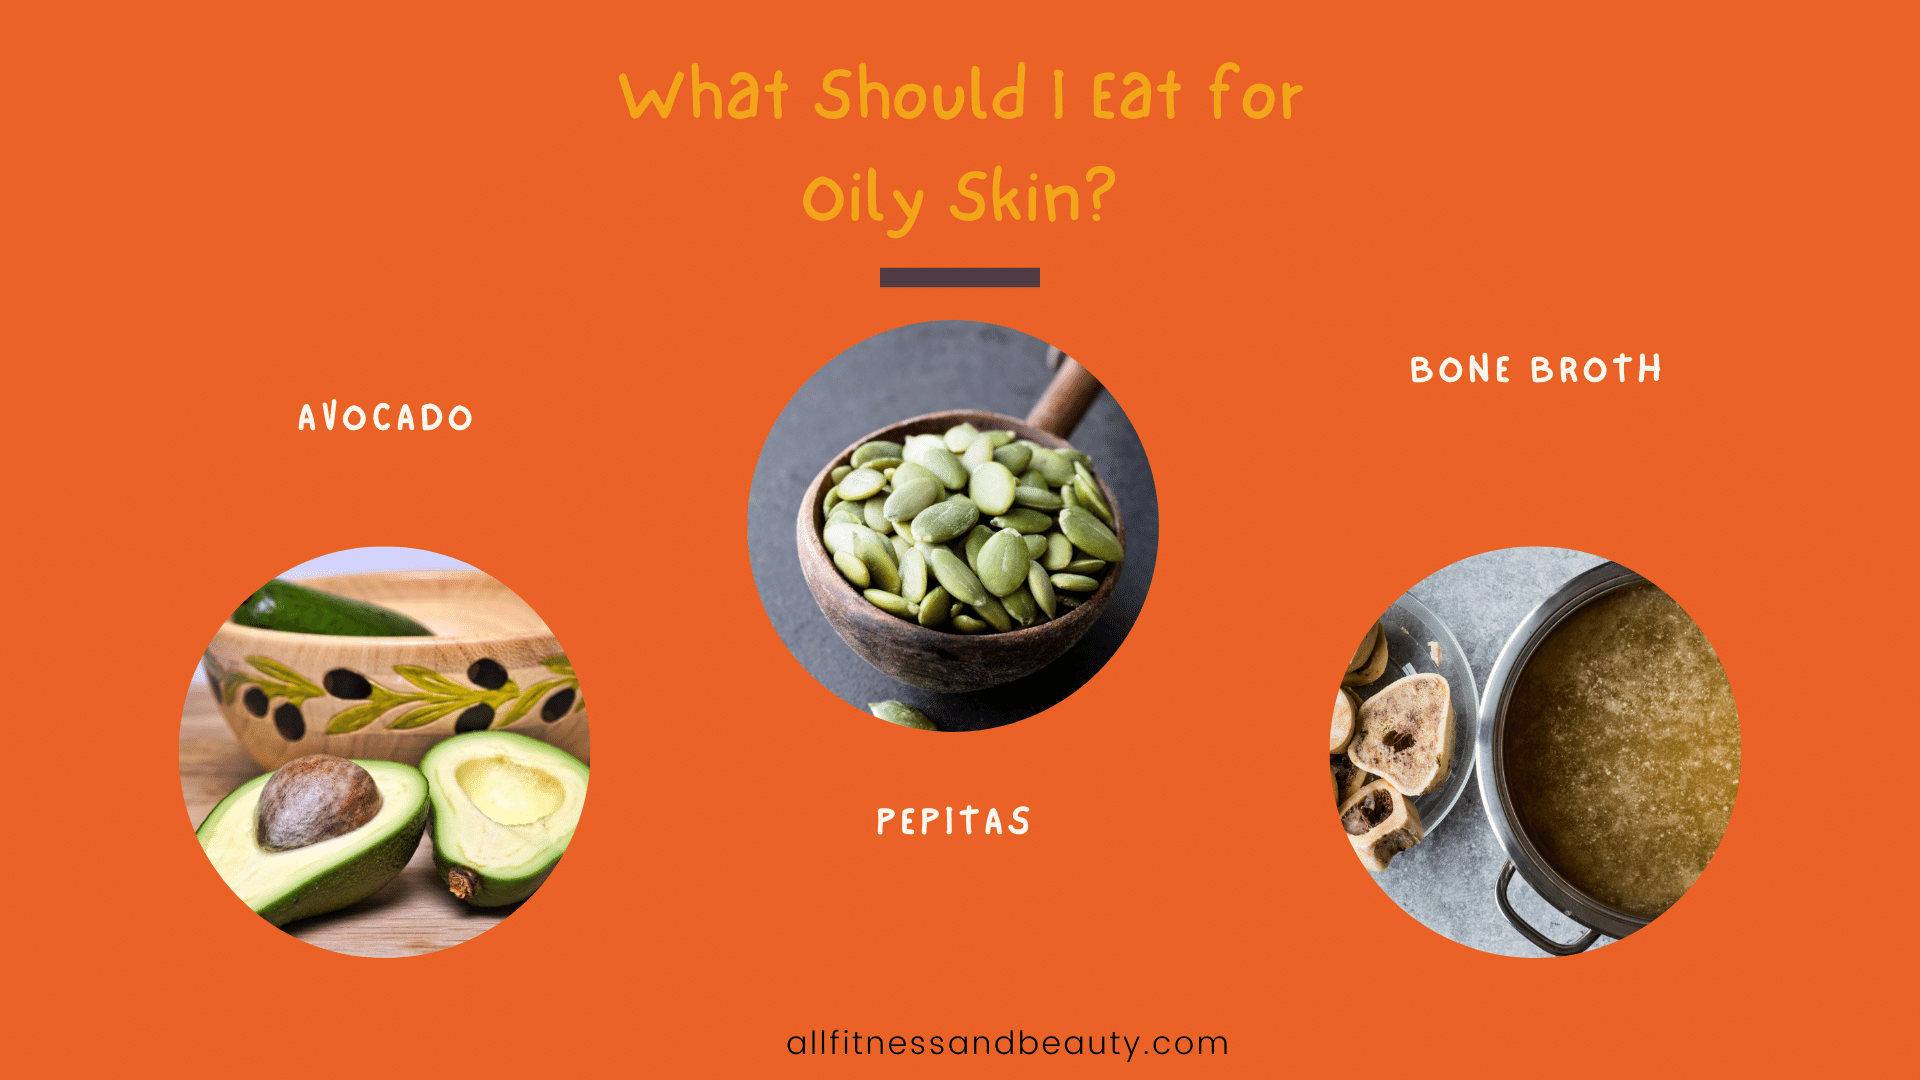 What Should I Eat for Oily Skin